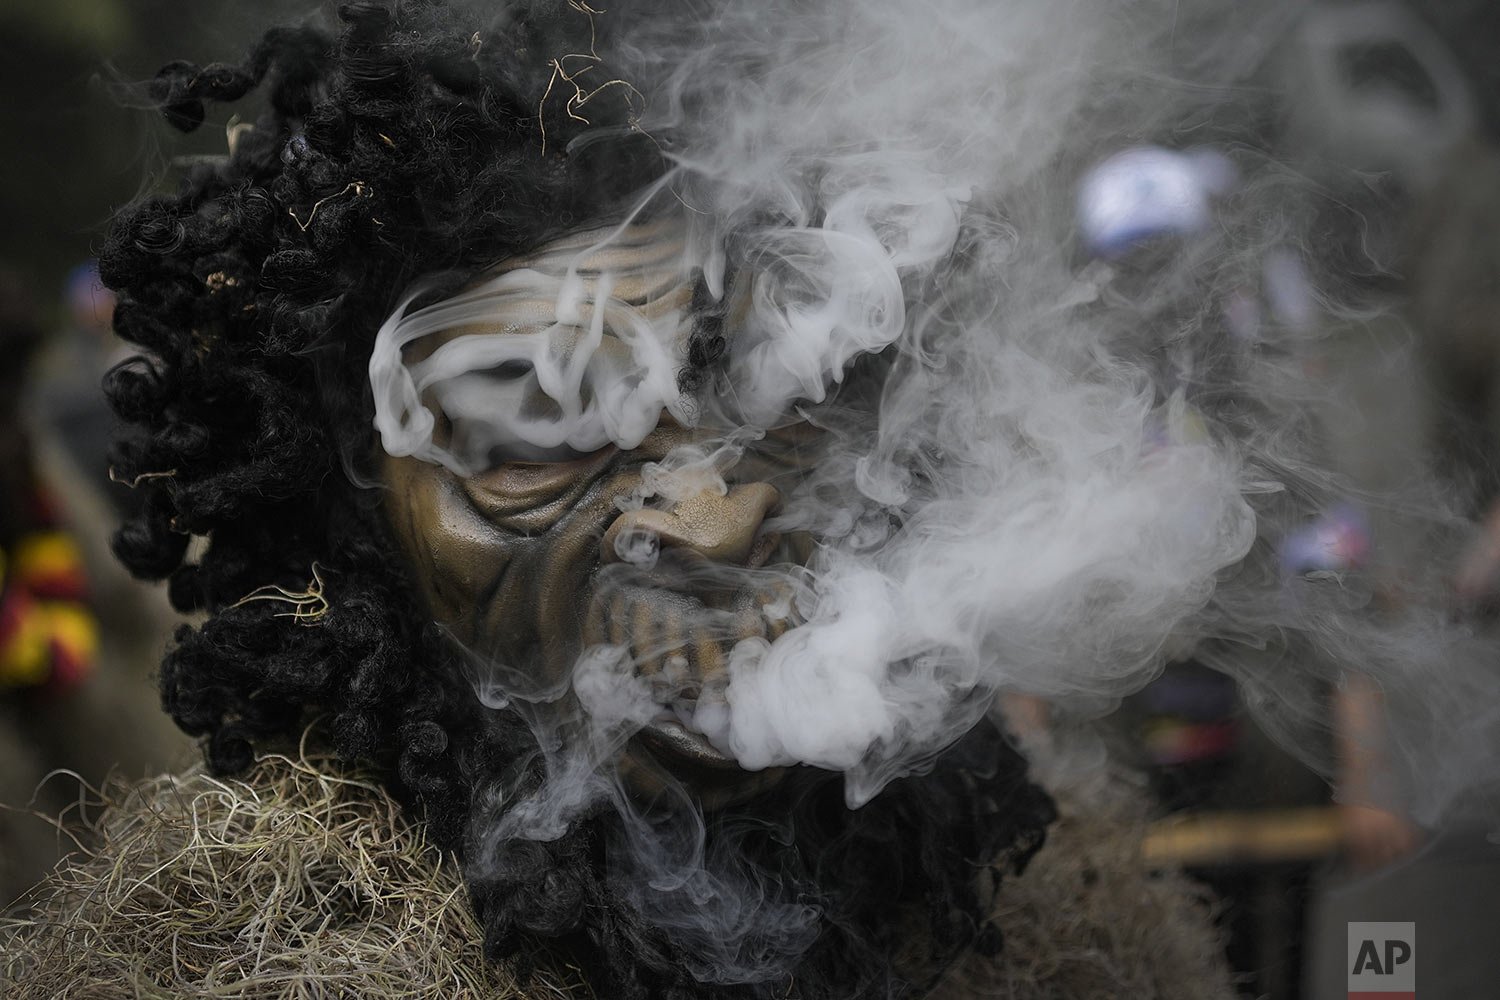  A man in a gorilla costume smokes before the start of a Carnival parade in Colonia Tovar, Venezuela, Feb. 26, 2022. People poured onto the streets of this German-founded village to enjoy a parade of people dressed as harlequin-like figures and as go